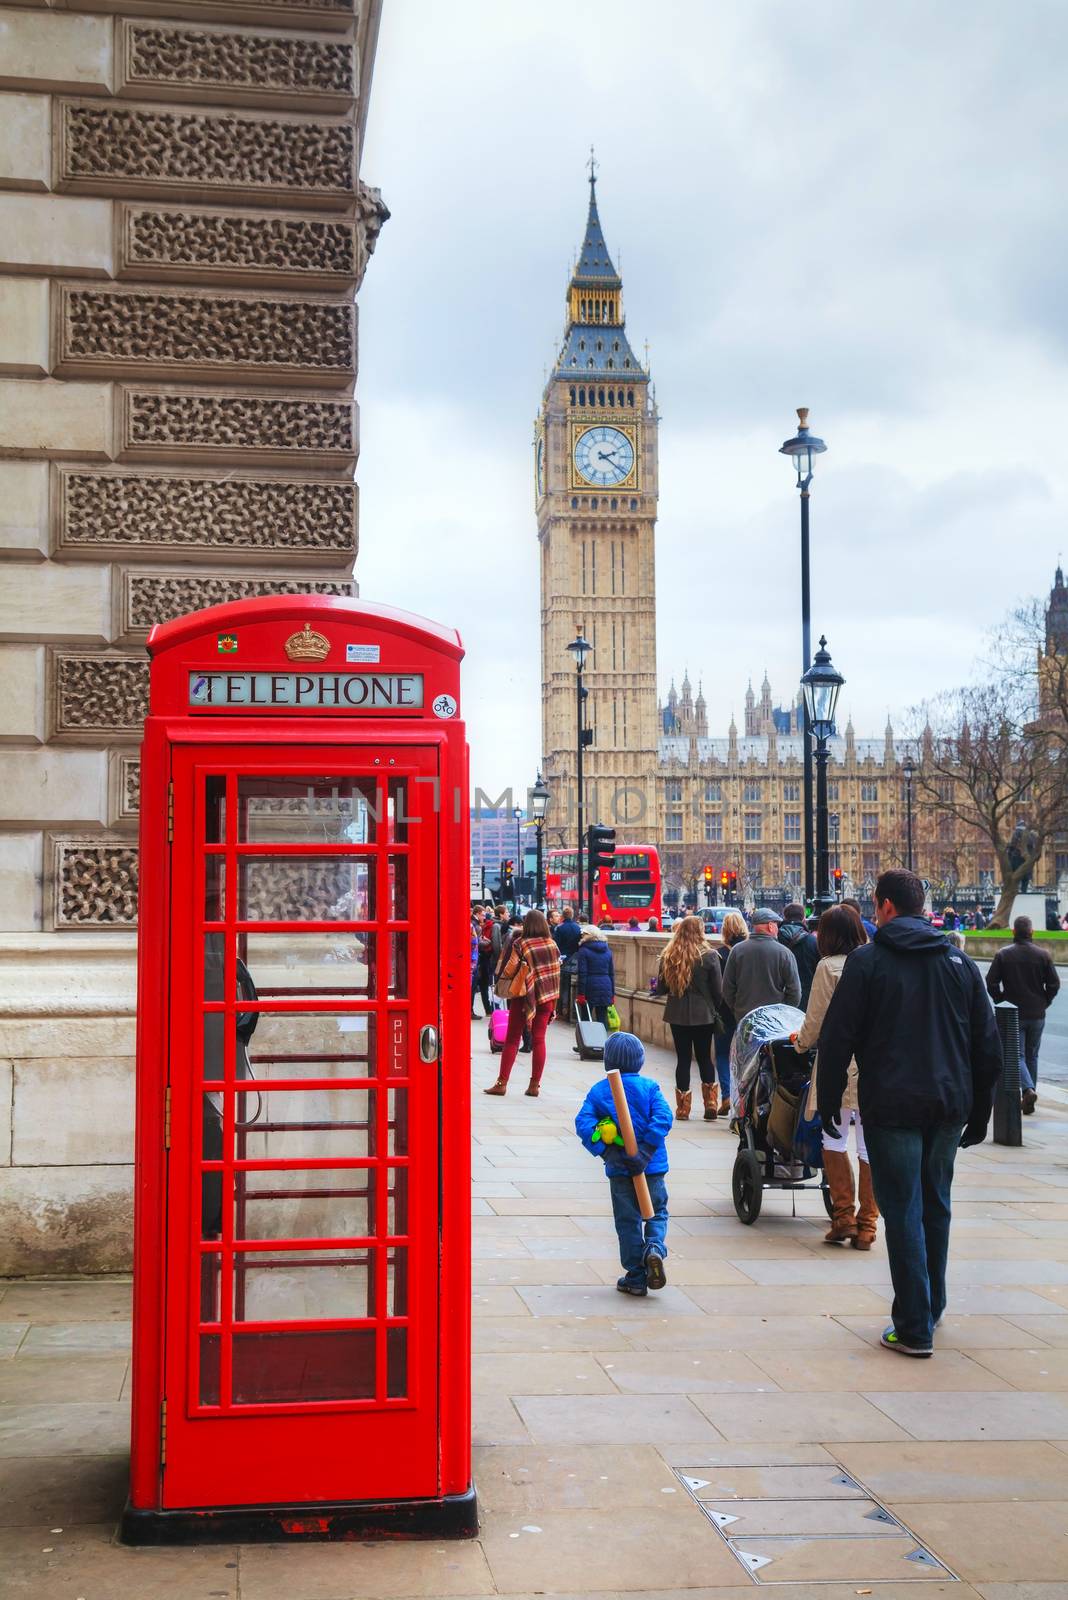 LONDON - APRIL 4: Famous red telephone booth on April 4, 2015 in London, UK. The red telephone box, a telephone kiosk for a public telephone designed by Sir Giles Gilbert Scott.